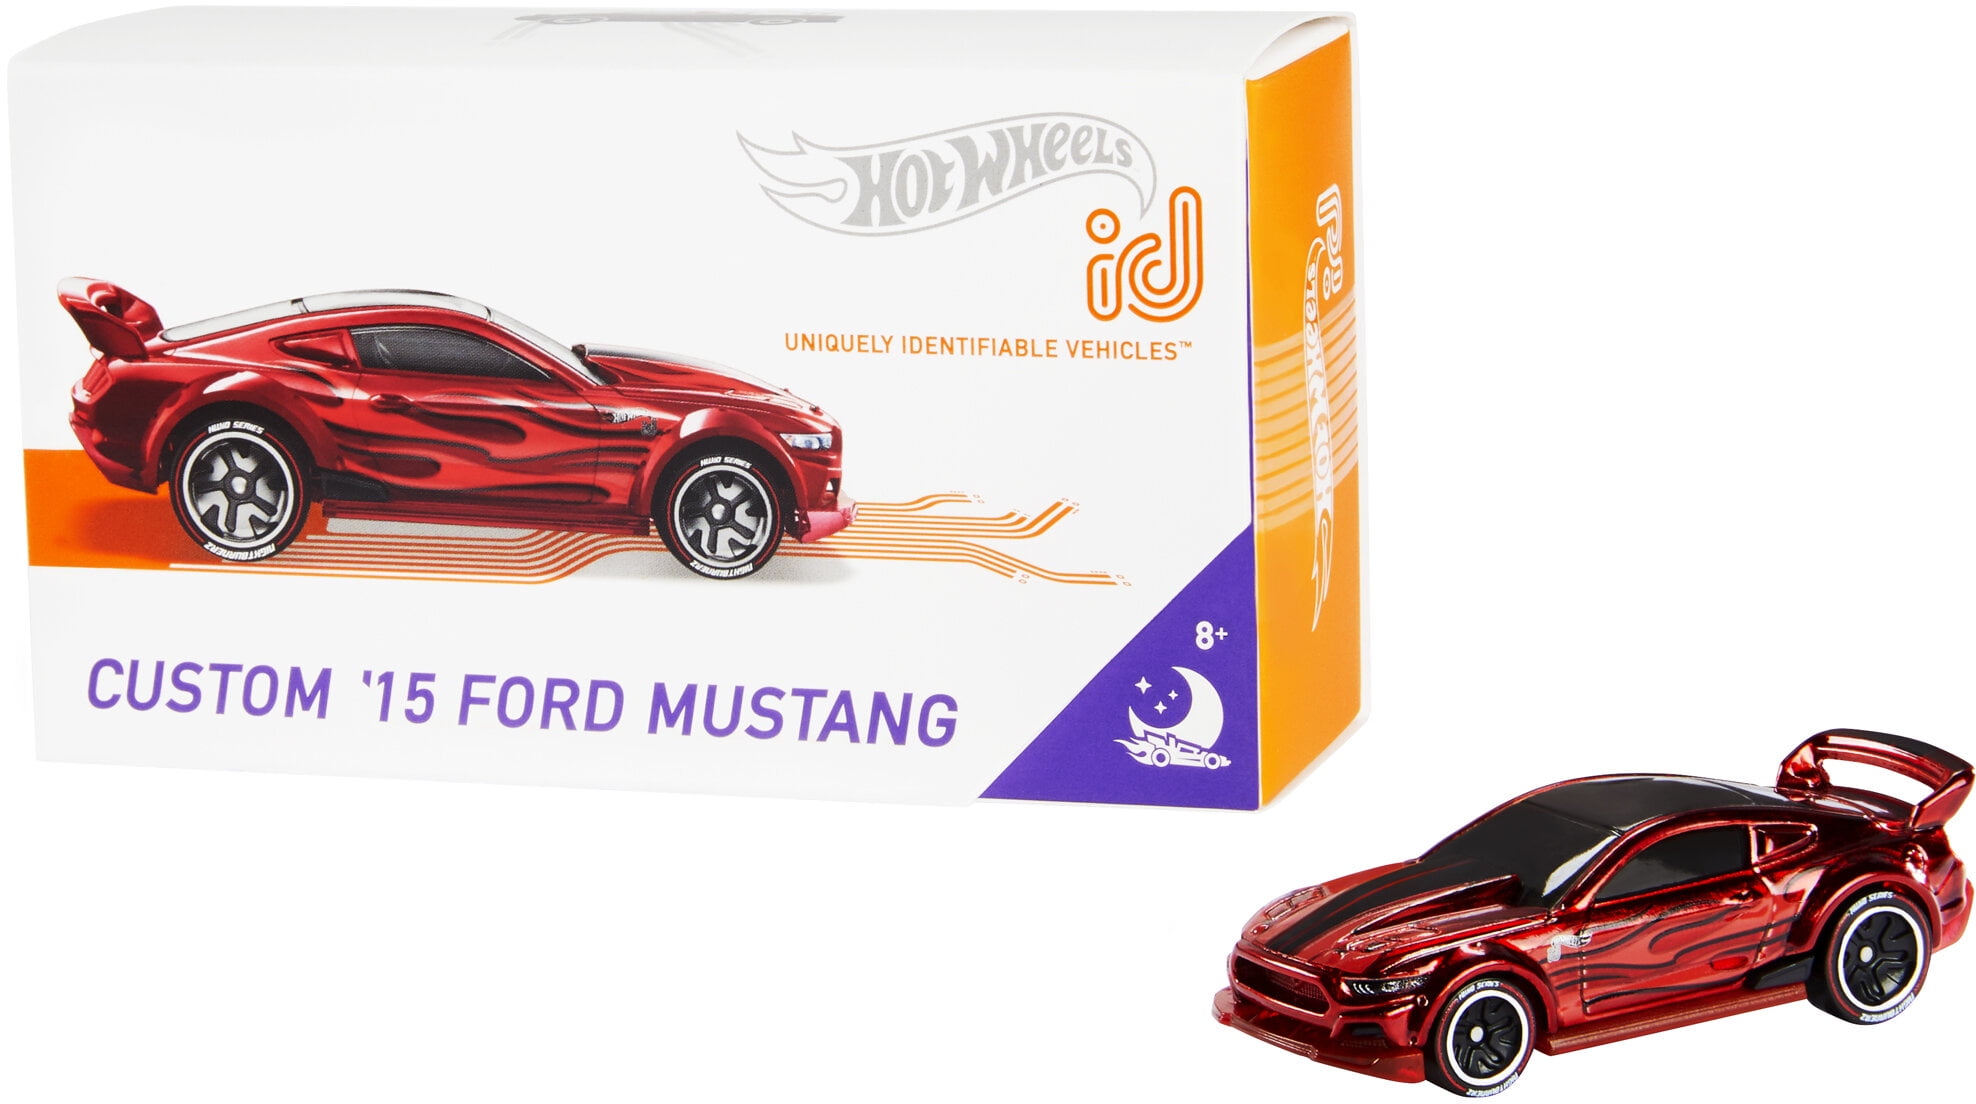 Details about   Hot Wheels 2014 #018/250 CUSTOM 2012 FORD MUSTANG red HW CITY 